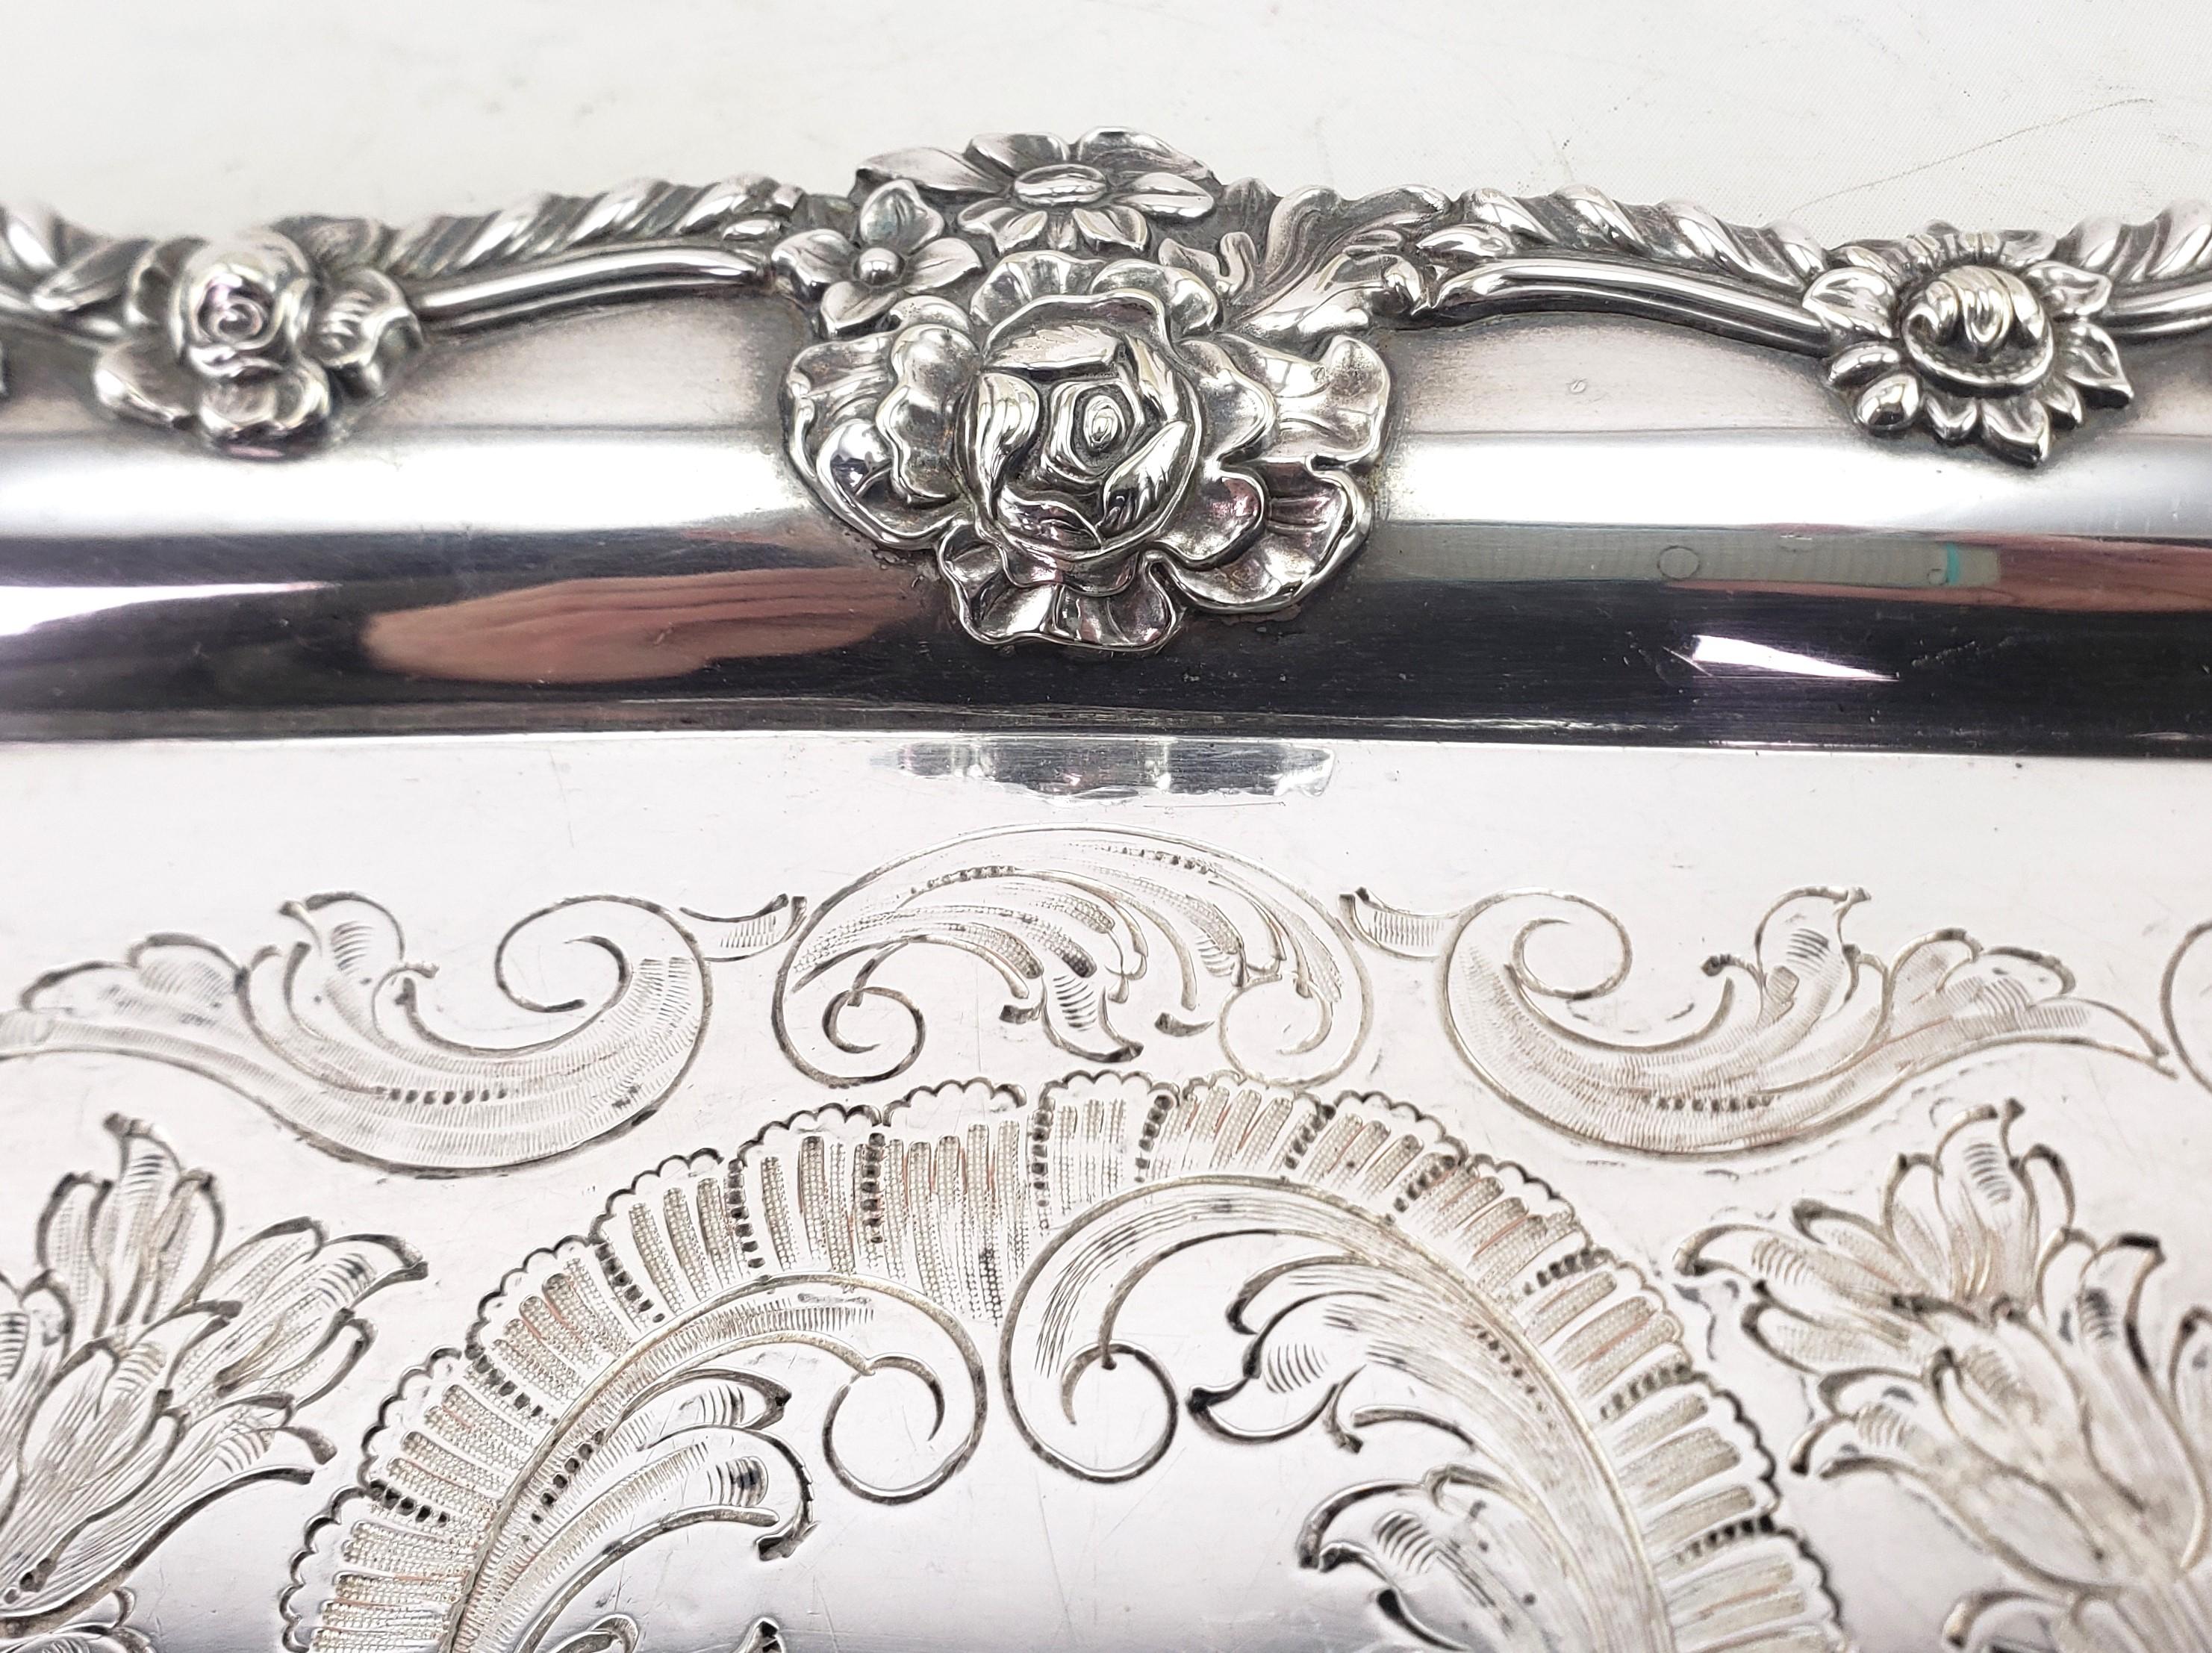 Large Antique English Silver Plated Serving Tray with Ornate Floral Decoration For Sale 4